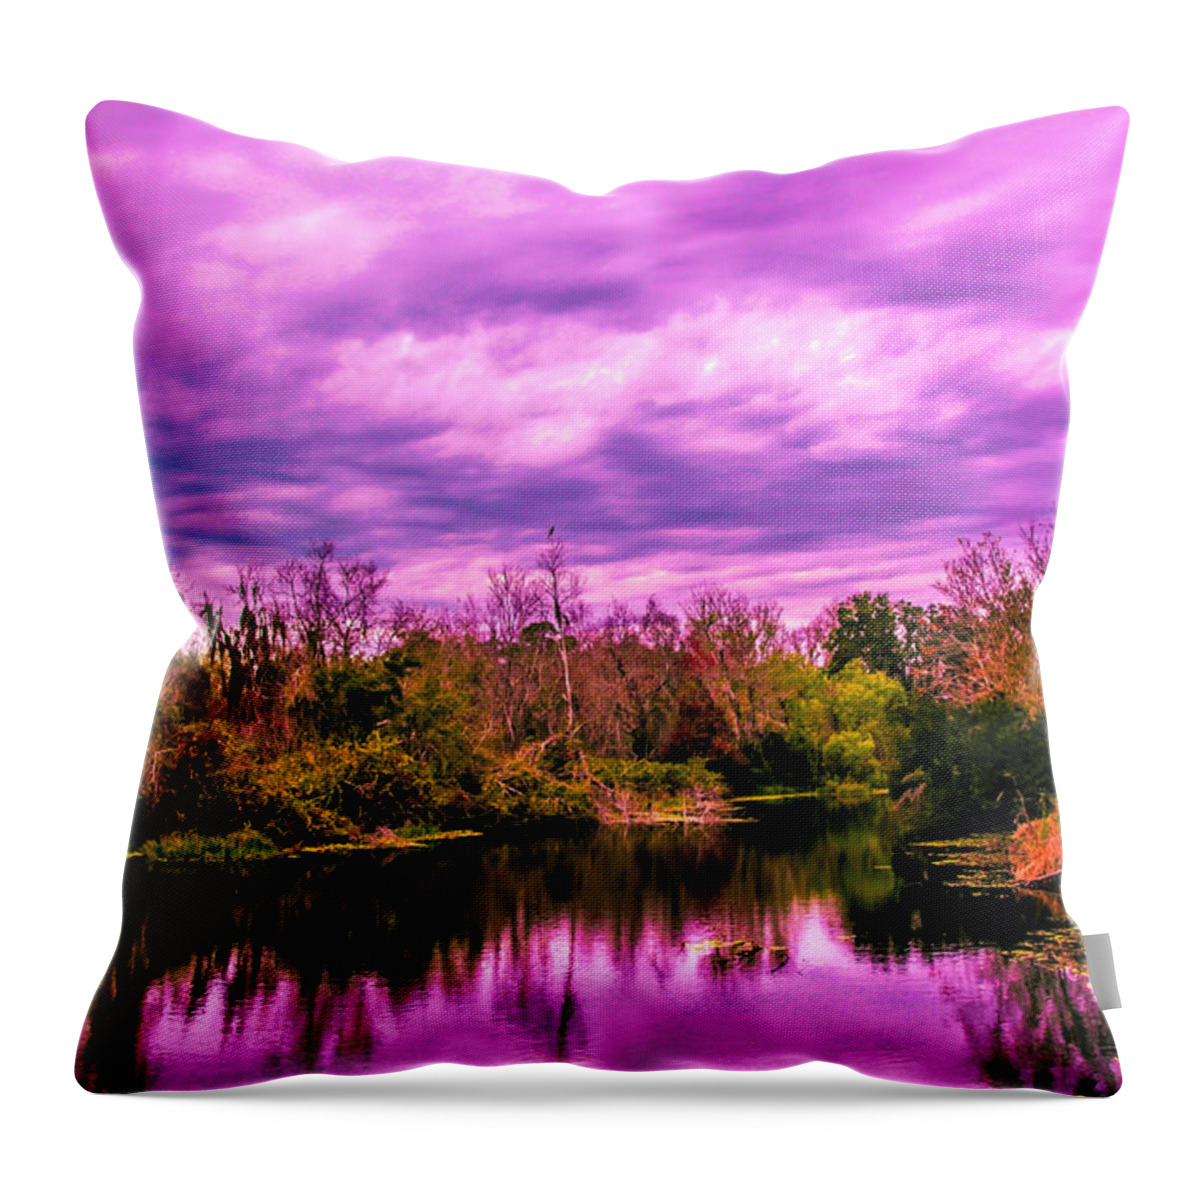 Land Throw Pillow featuring the photograph Sarasota Symphony 2 by Madeline Ellis